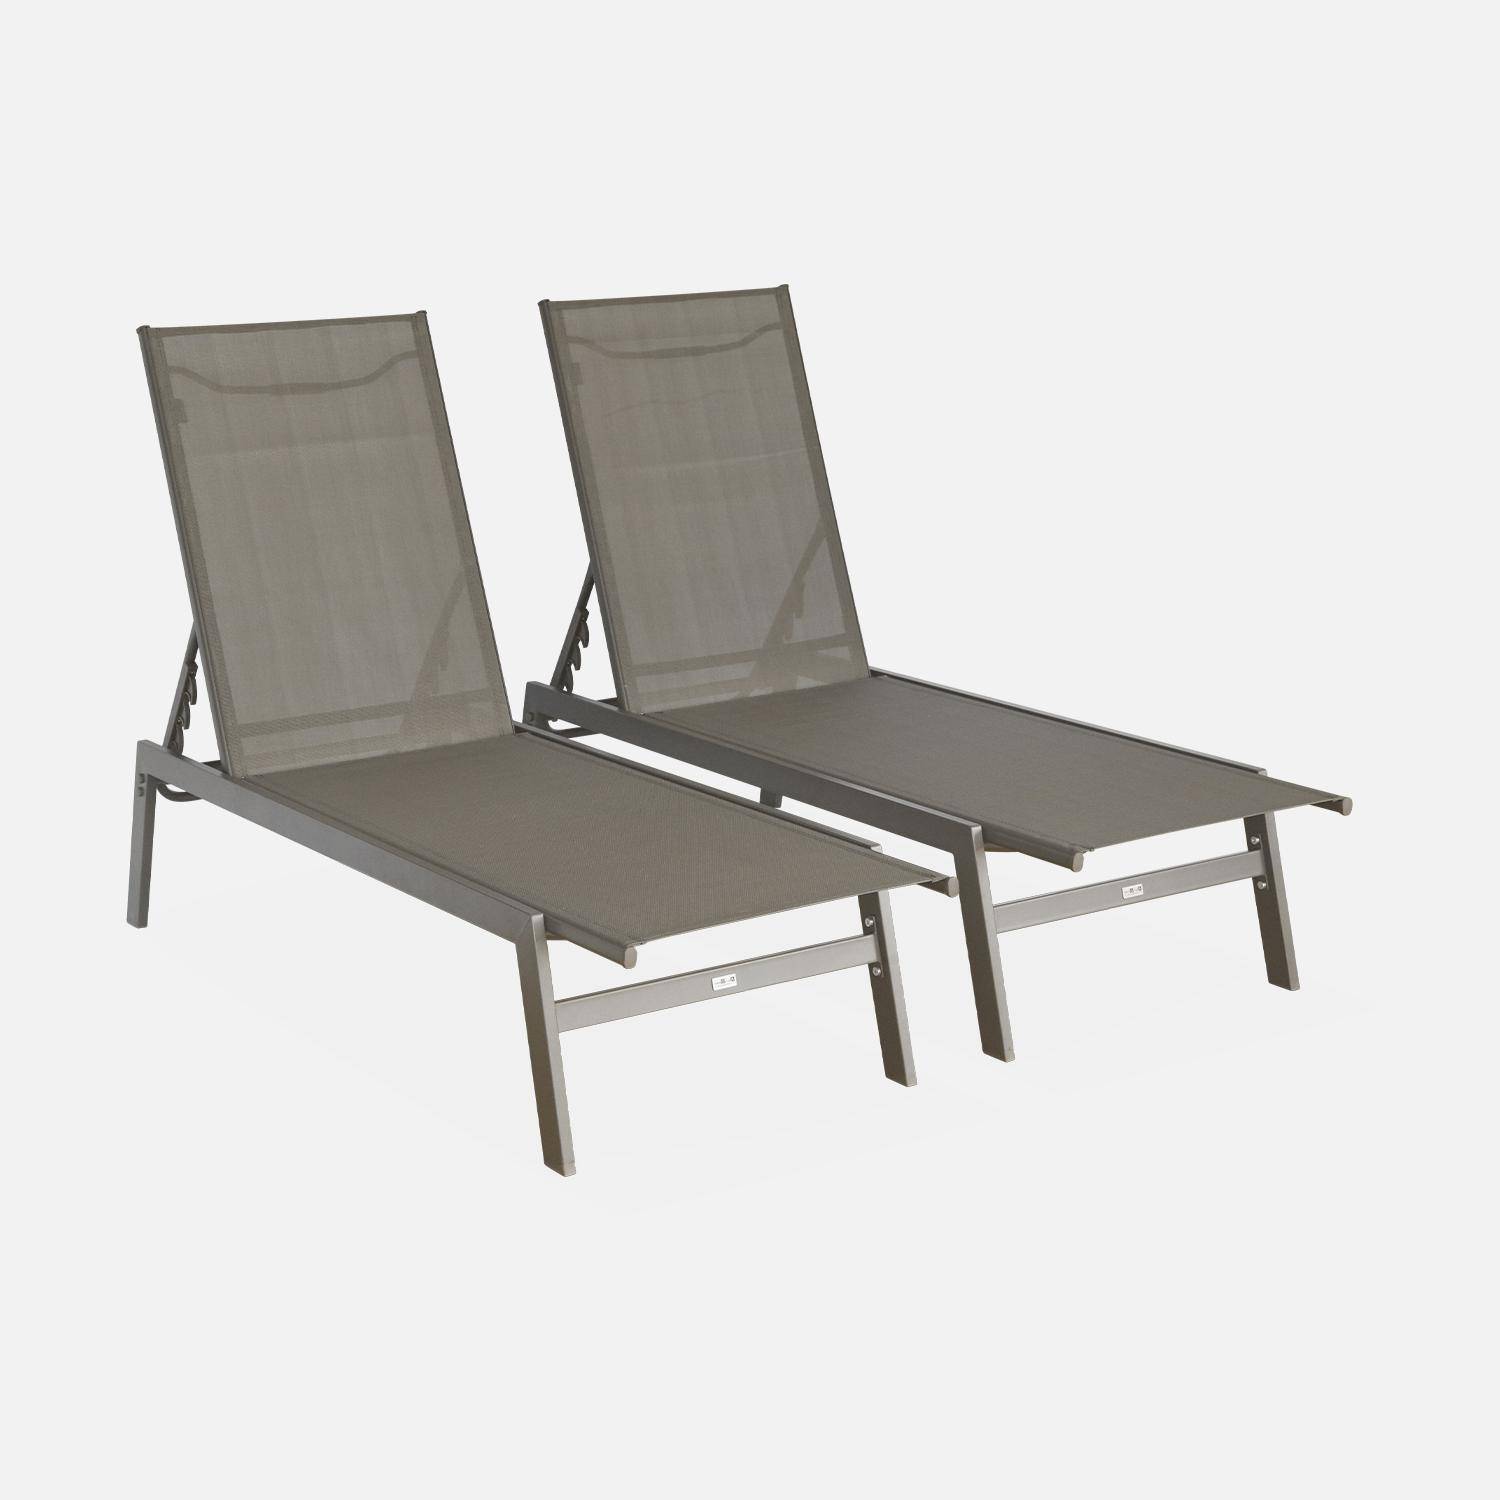 Pair of textilene and metal multi-position loungers, brown Photo3